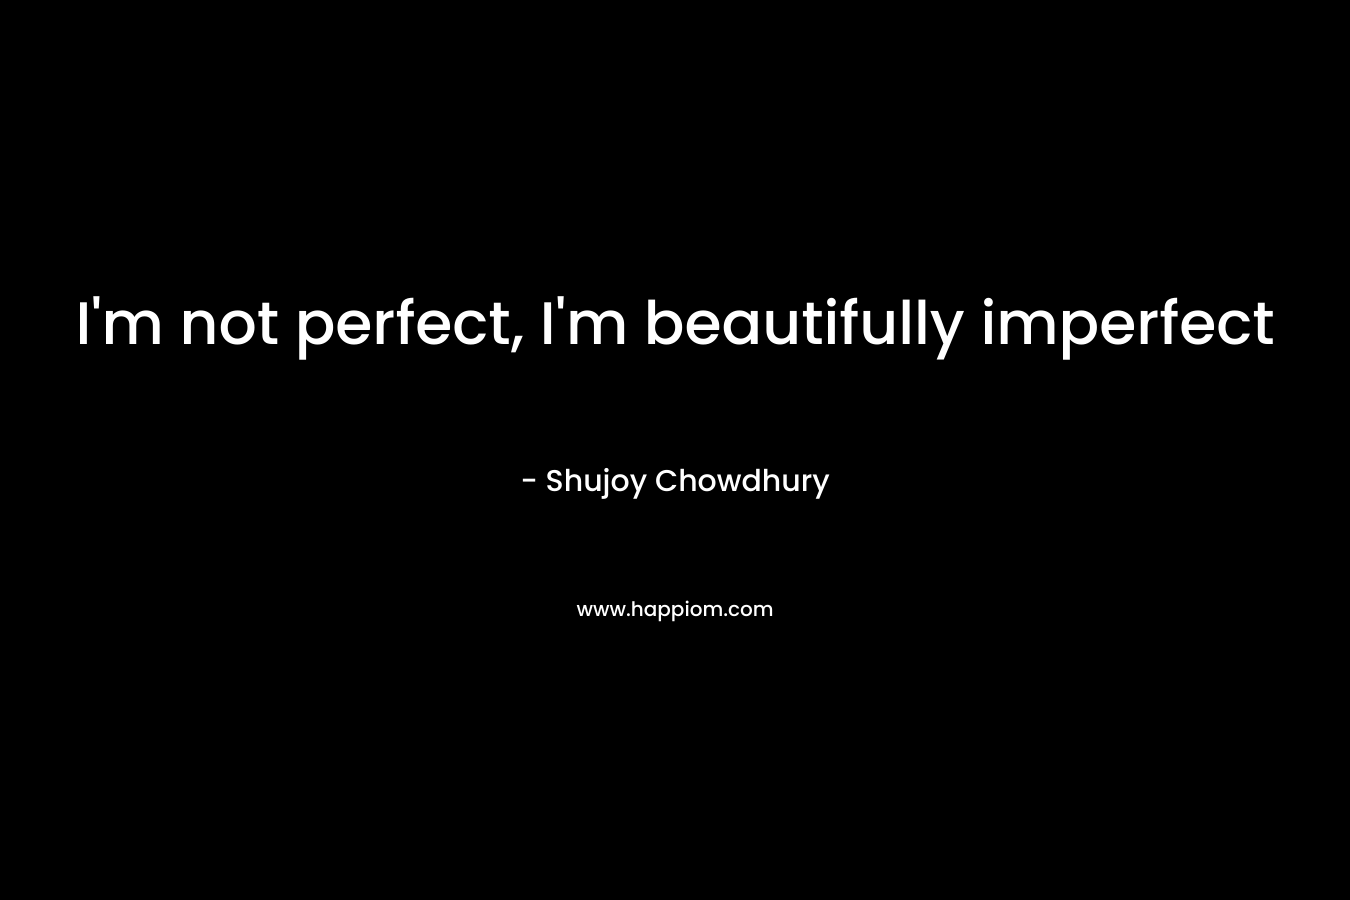 I'm not perfect, I'm beautifully imperfect